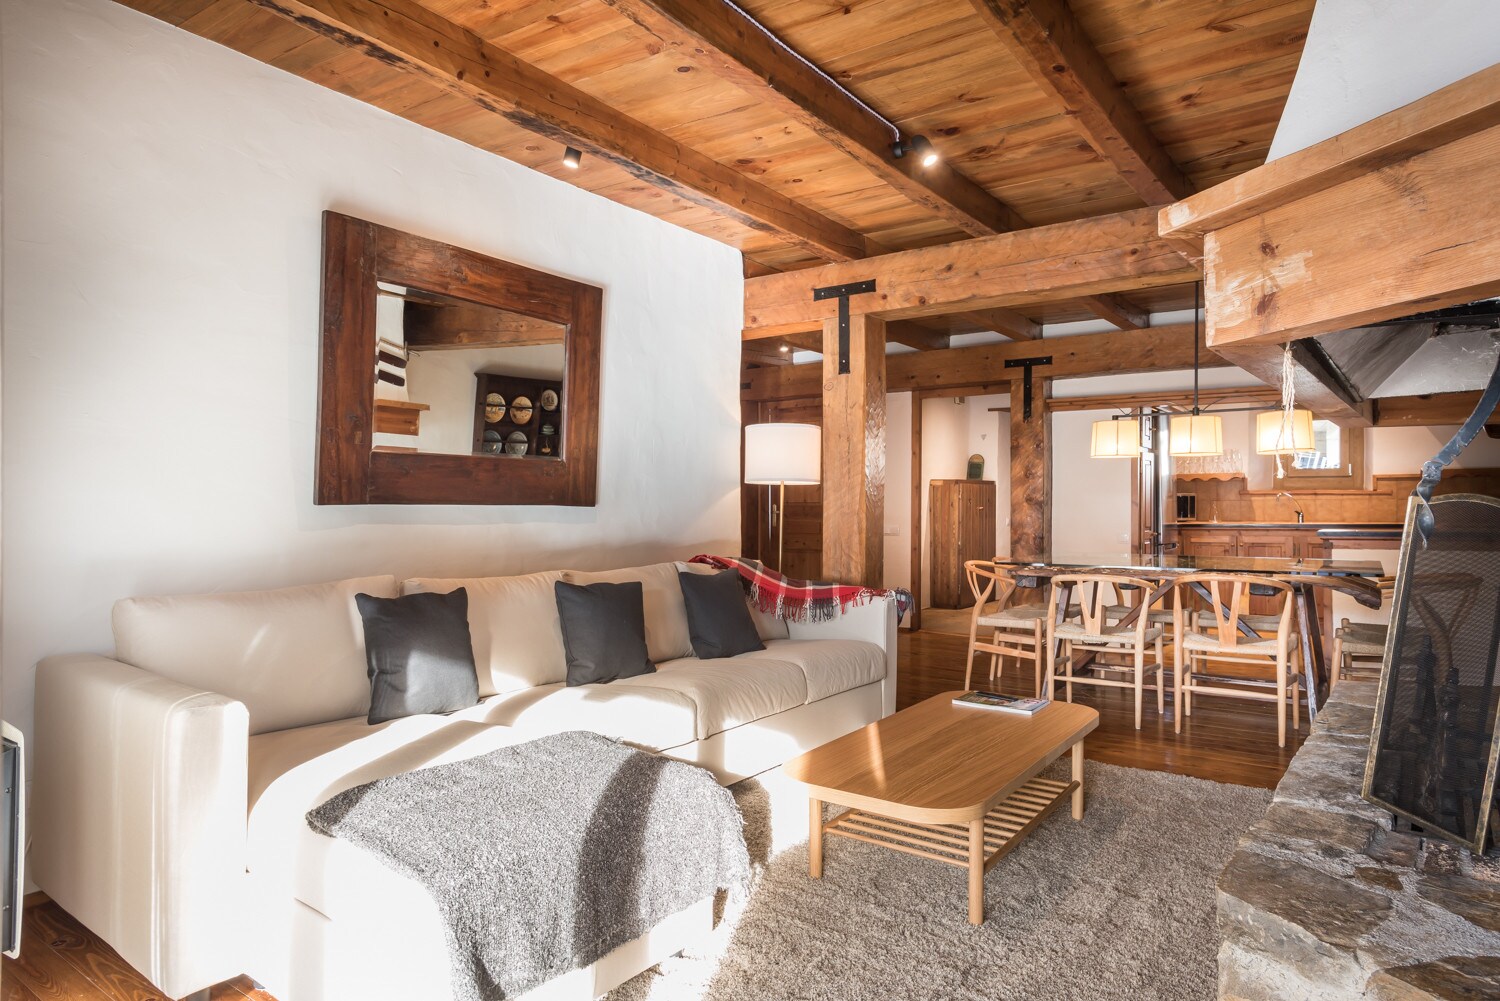 Property Image 2 - Manaud cozy apartment  3 bedrooms 9 people,in Pleta de Jus at Baqueira ,next to the ski chairlift of Baque